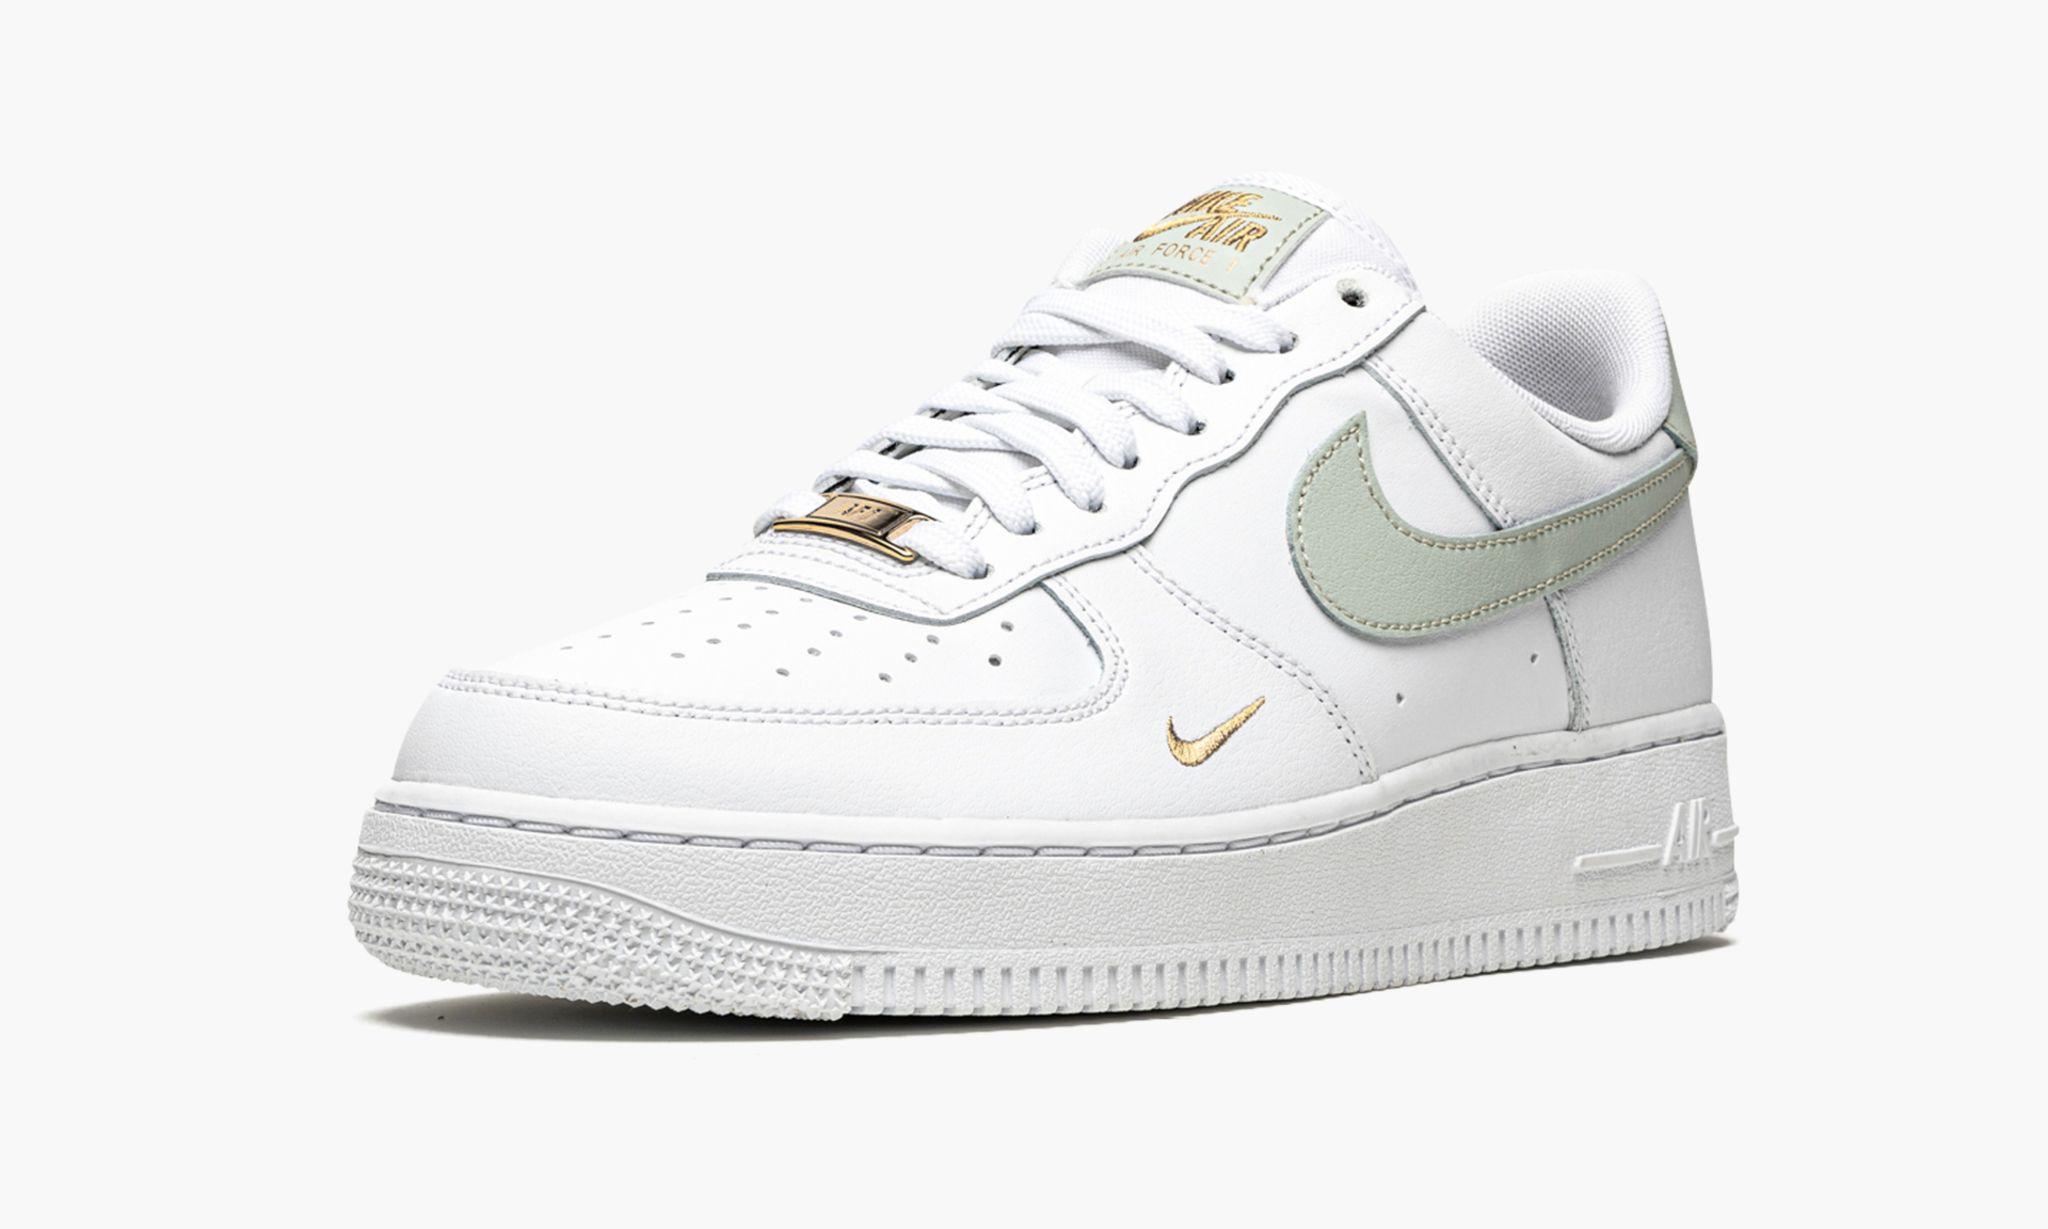 Nike Air Force 1 Low "white / Grey / Gold" Shoes in Black | Lyst